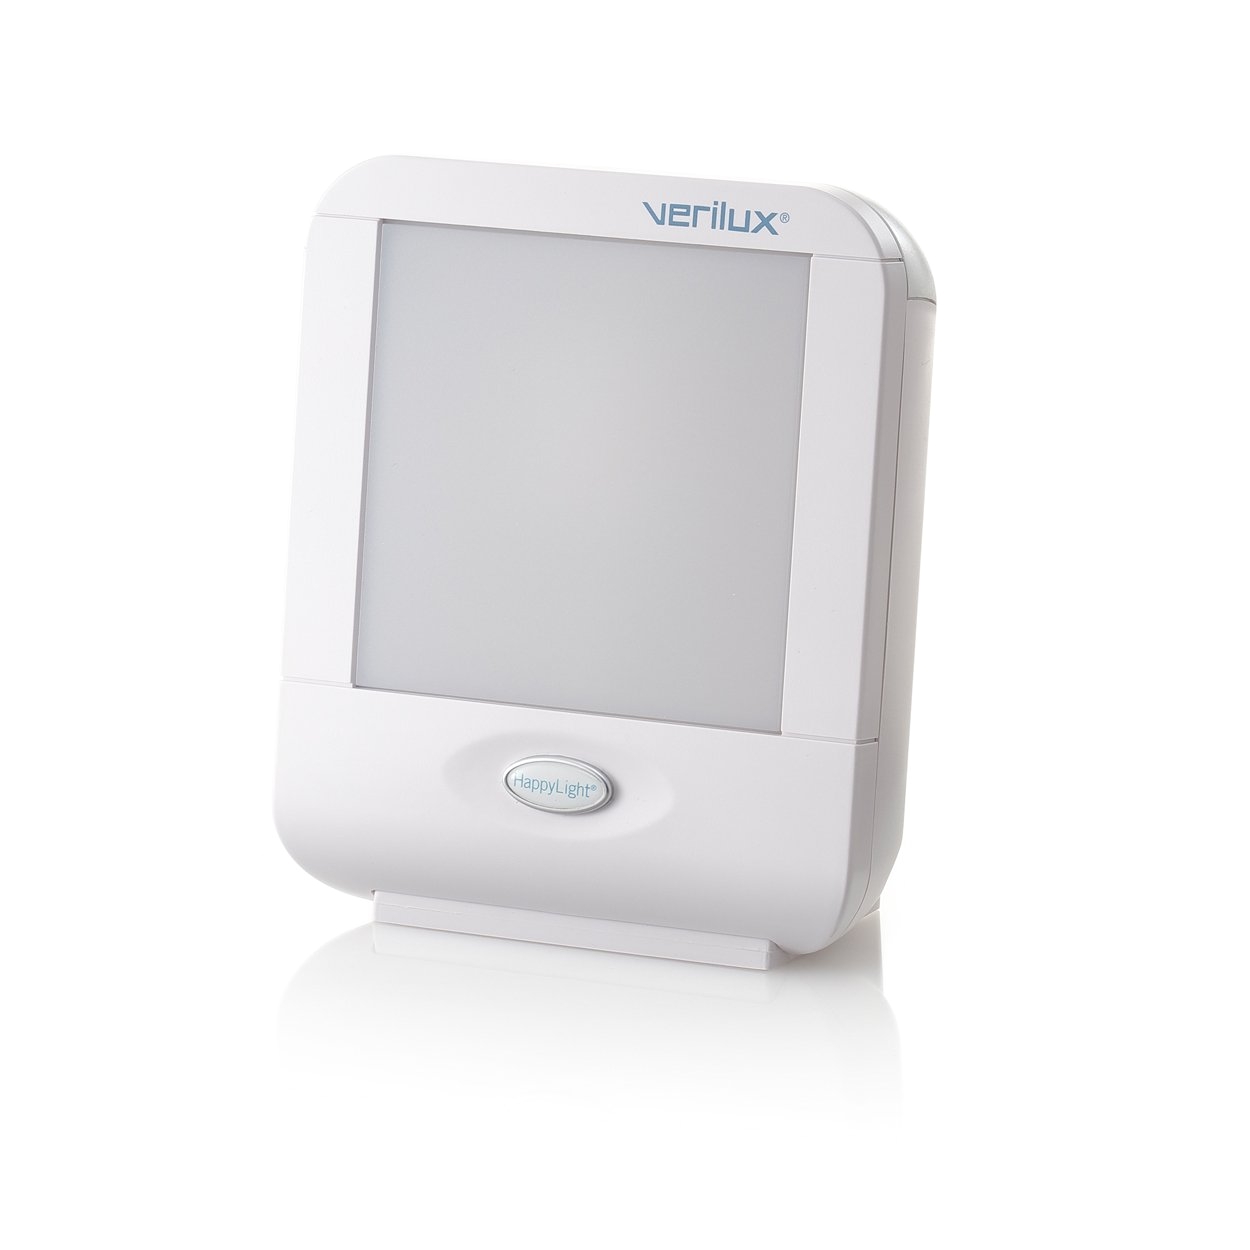 verilux happylight compact personal portable light therapy energy lamp